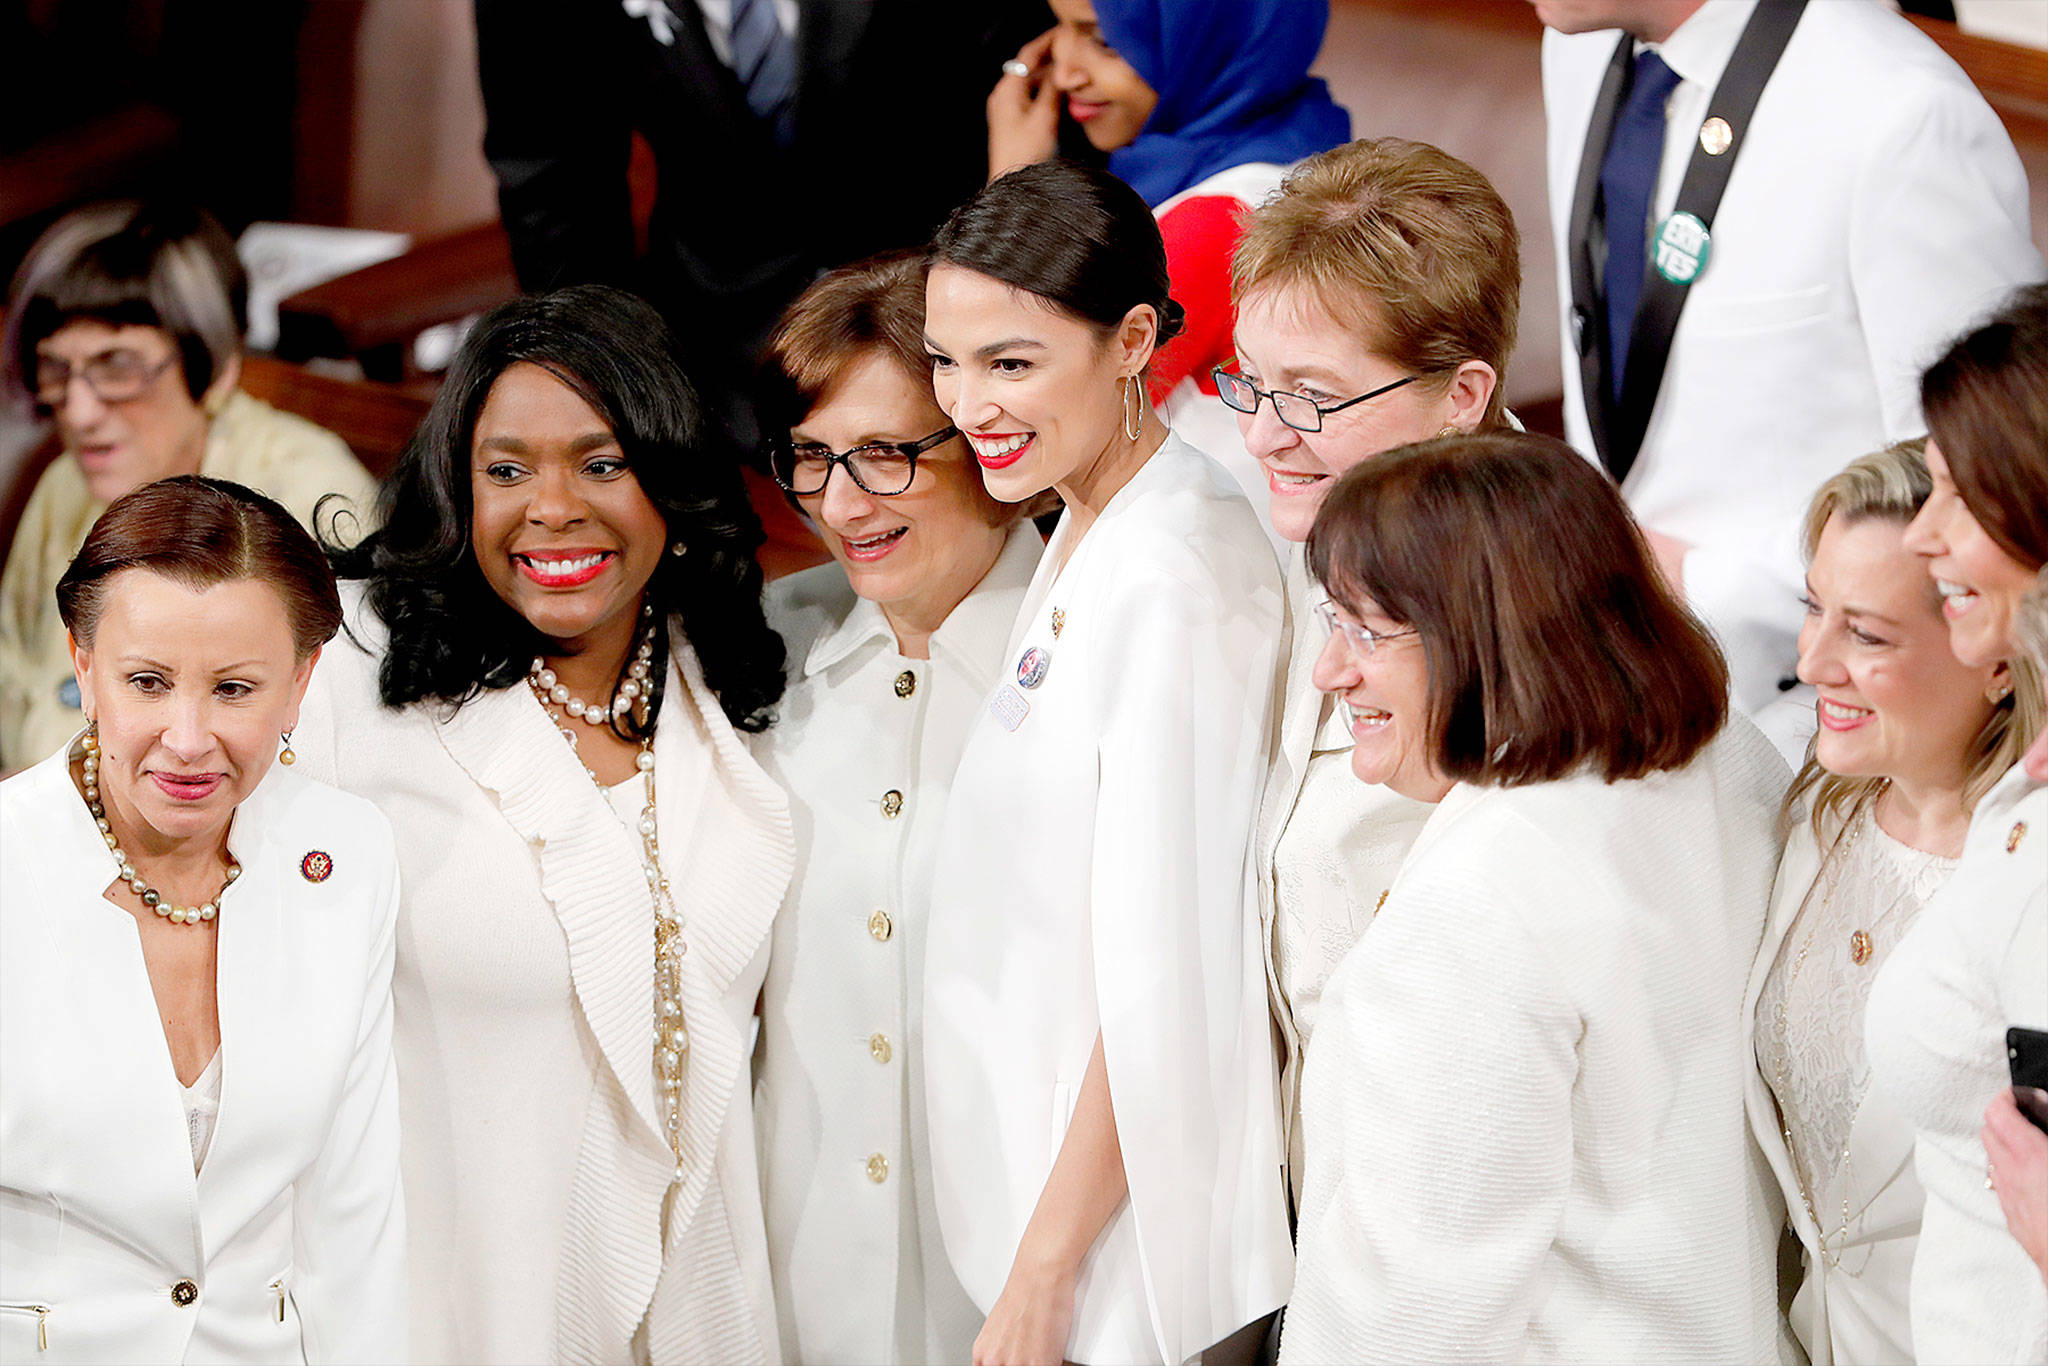 Democratic members of Congress, including Rep. Alexandria Ocasio-Cortez (center), D-N.Y., pose for a photo before President Donald Trump delivers his State of the Union address to a joint session of Congress on Capitol Hill in Washington on Tuesday. (AP Photo/J. Scott Applewhite)